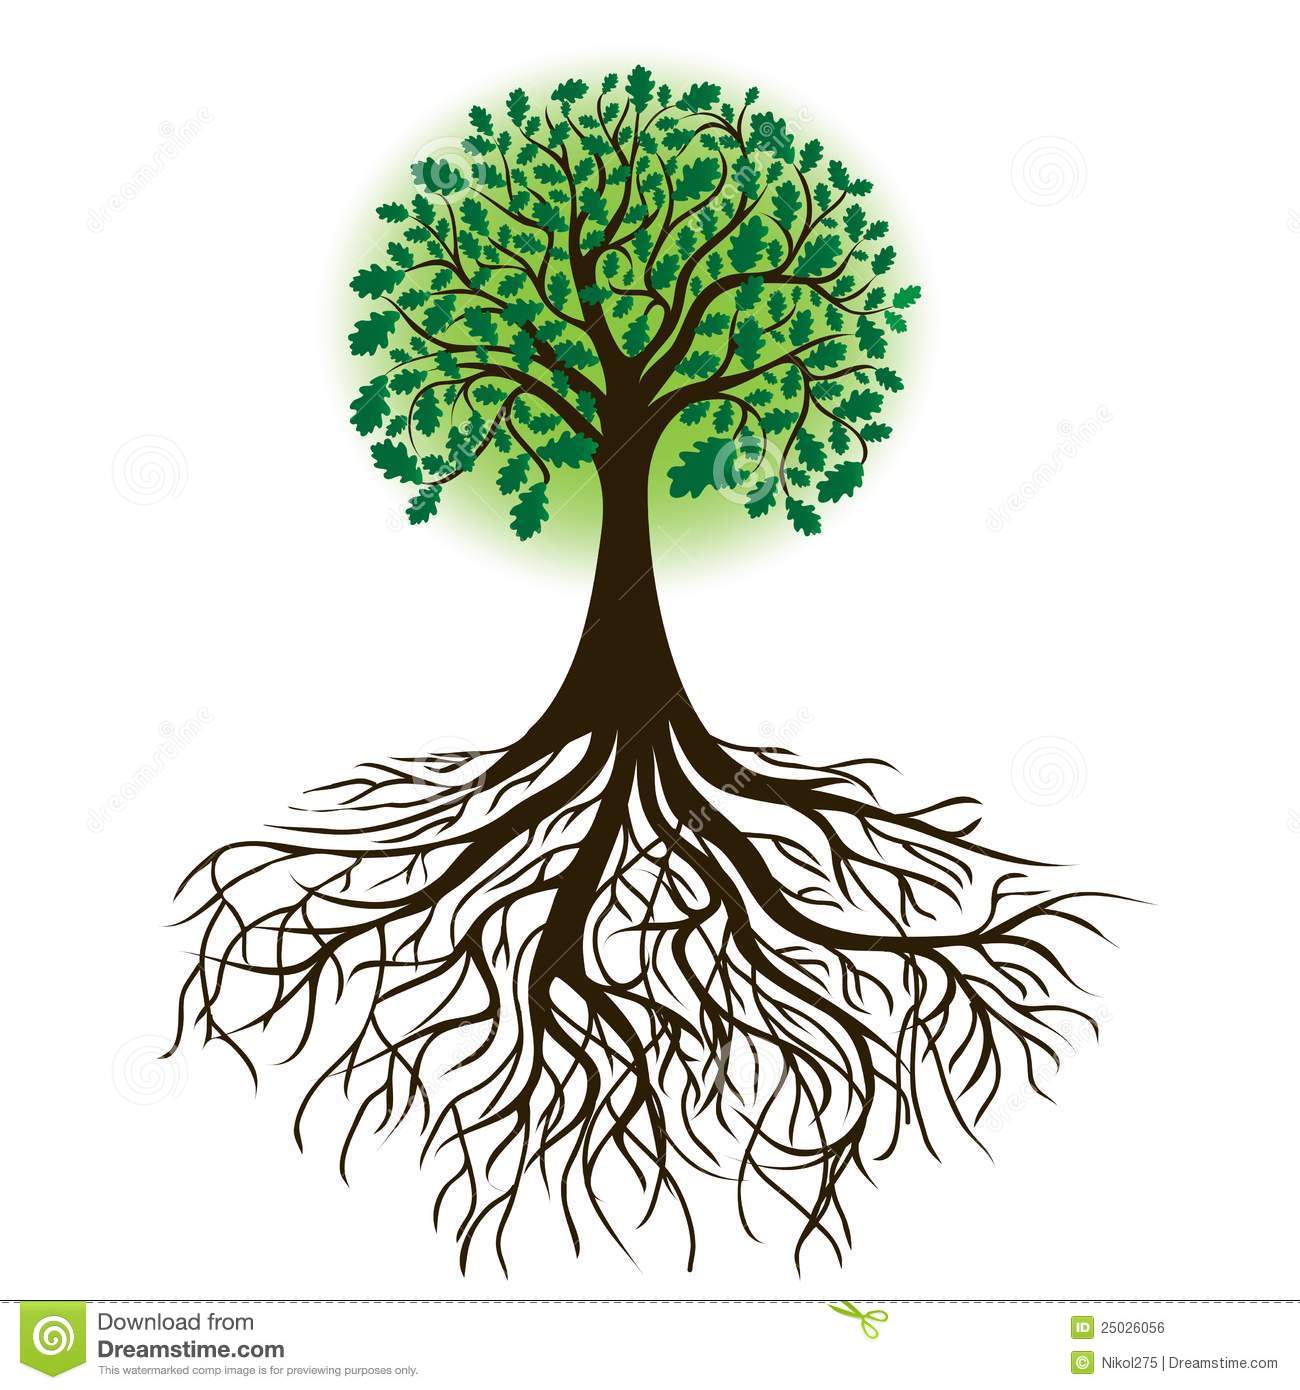 Tree Root clipart #6, Download drawings